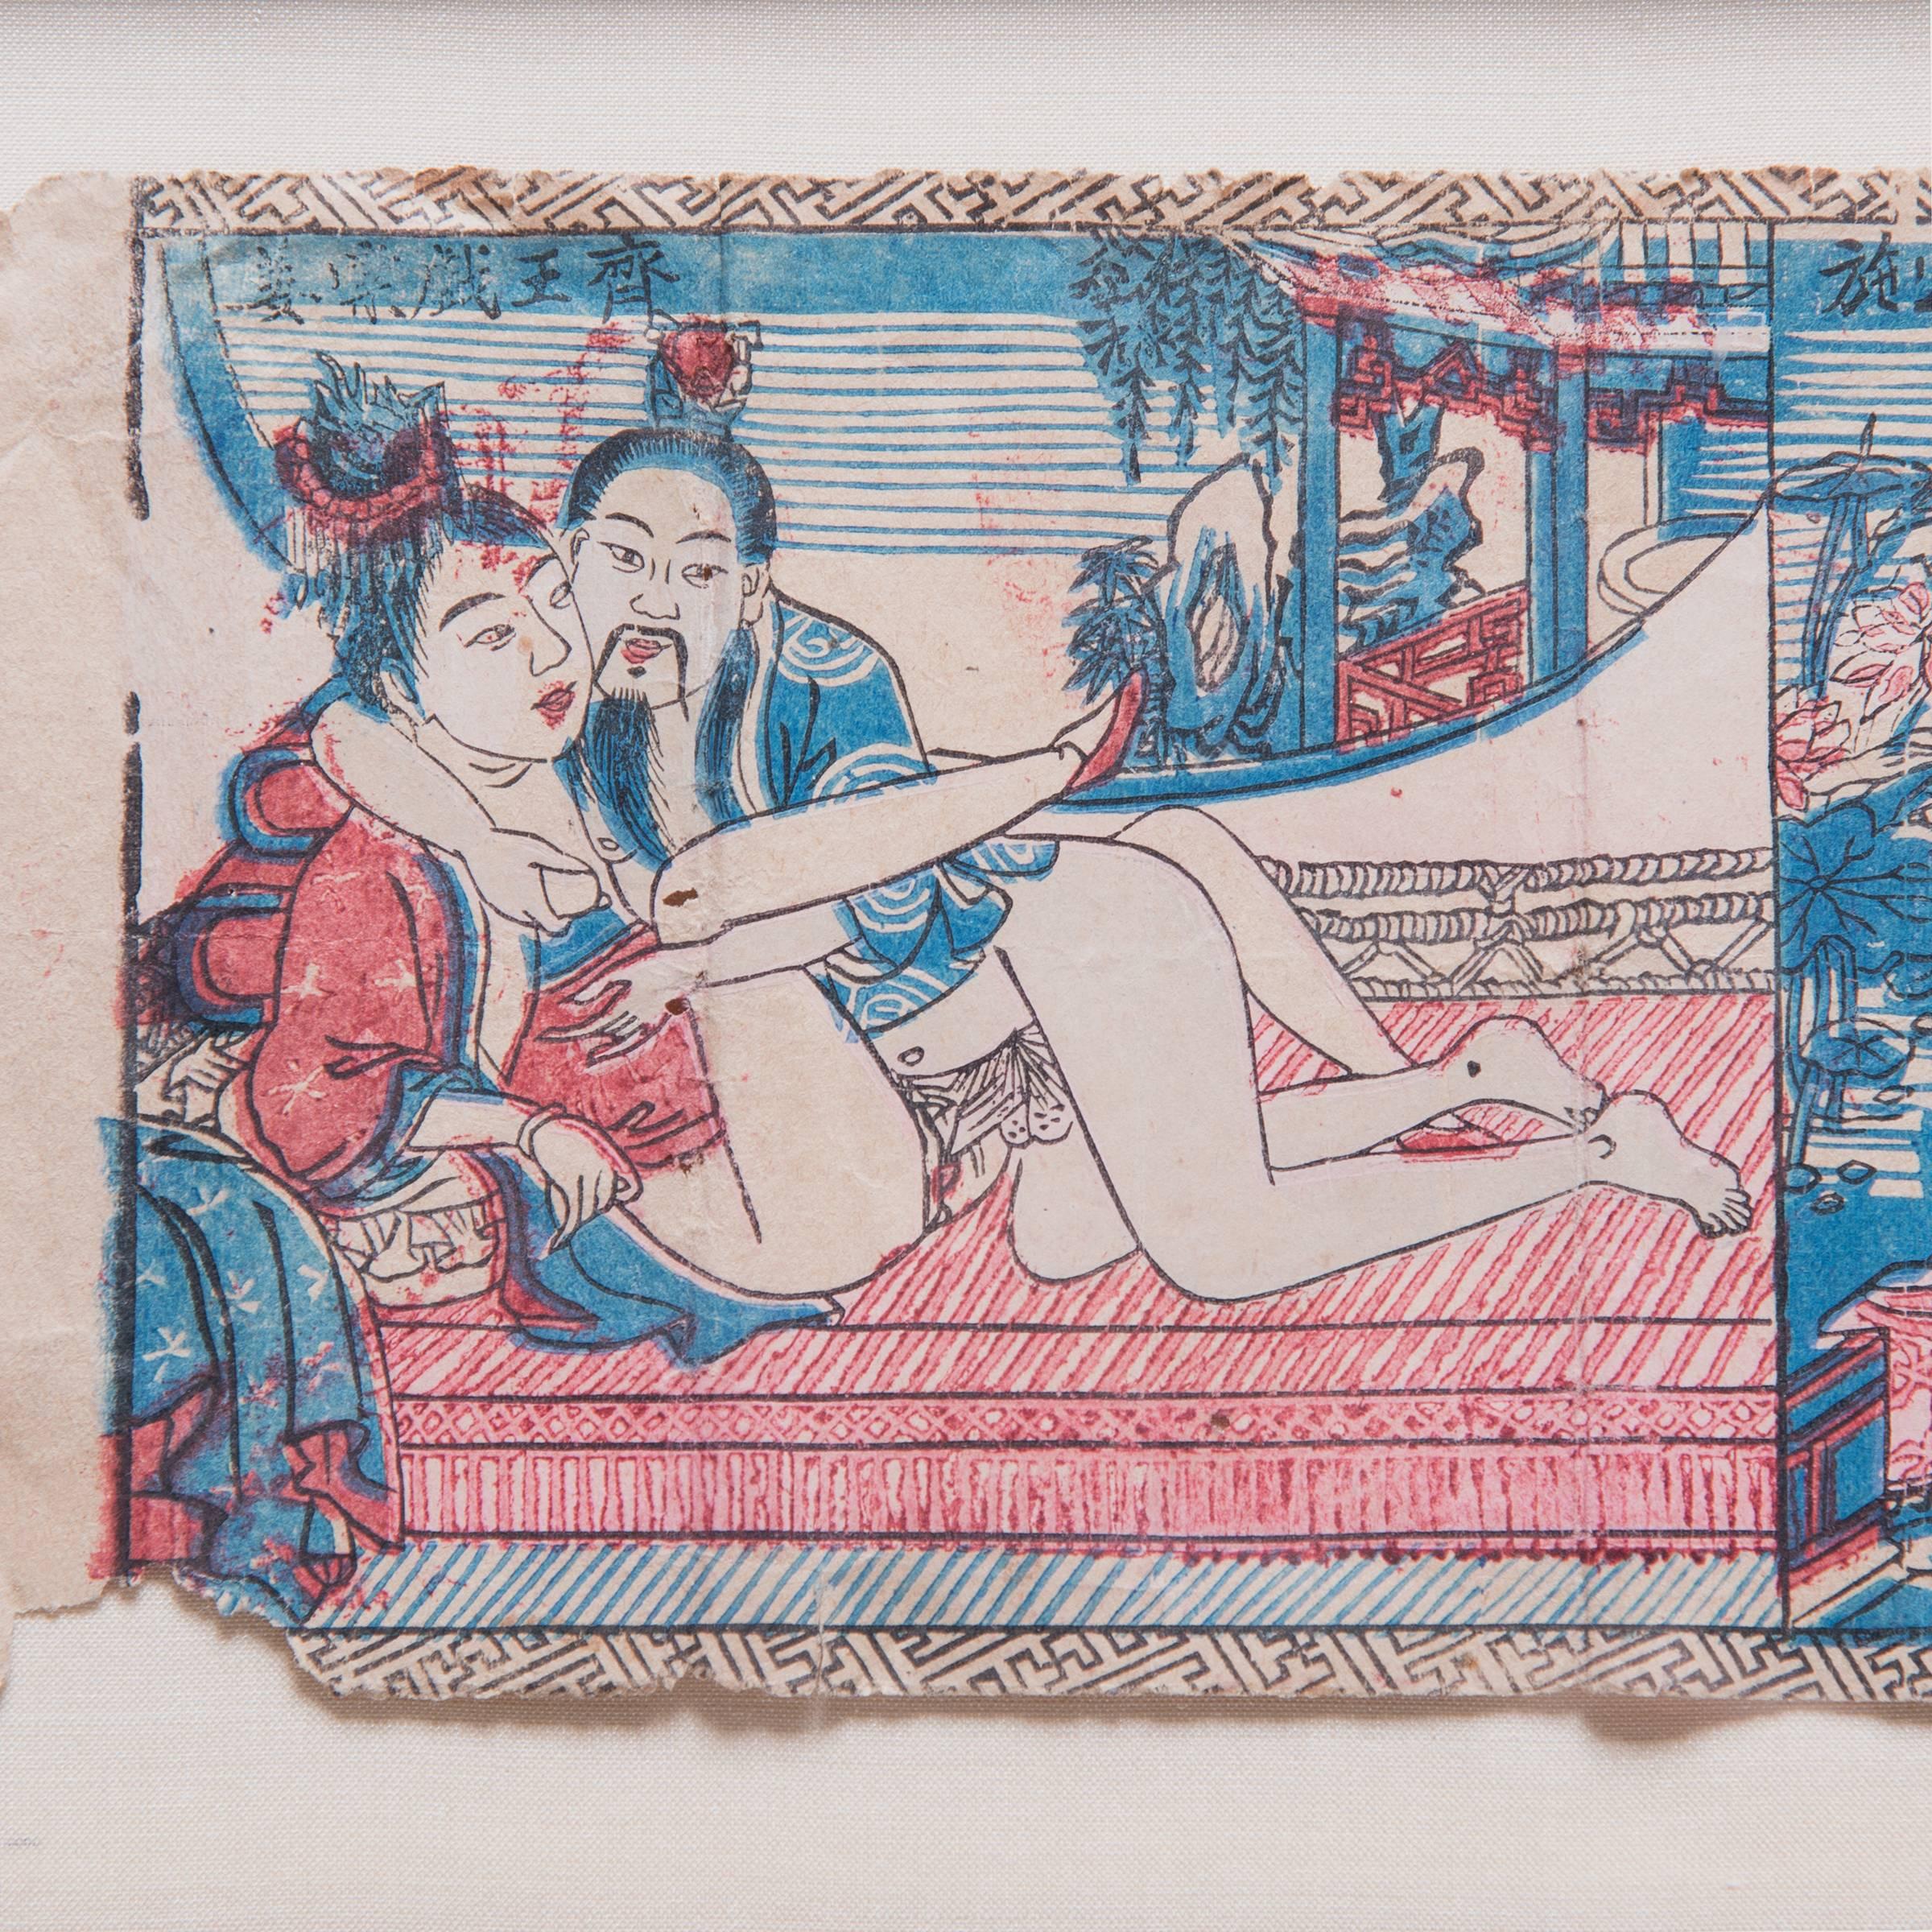 Erotically themed pillow books were often given to newlyweds in China as 